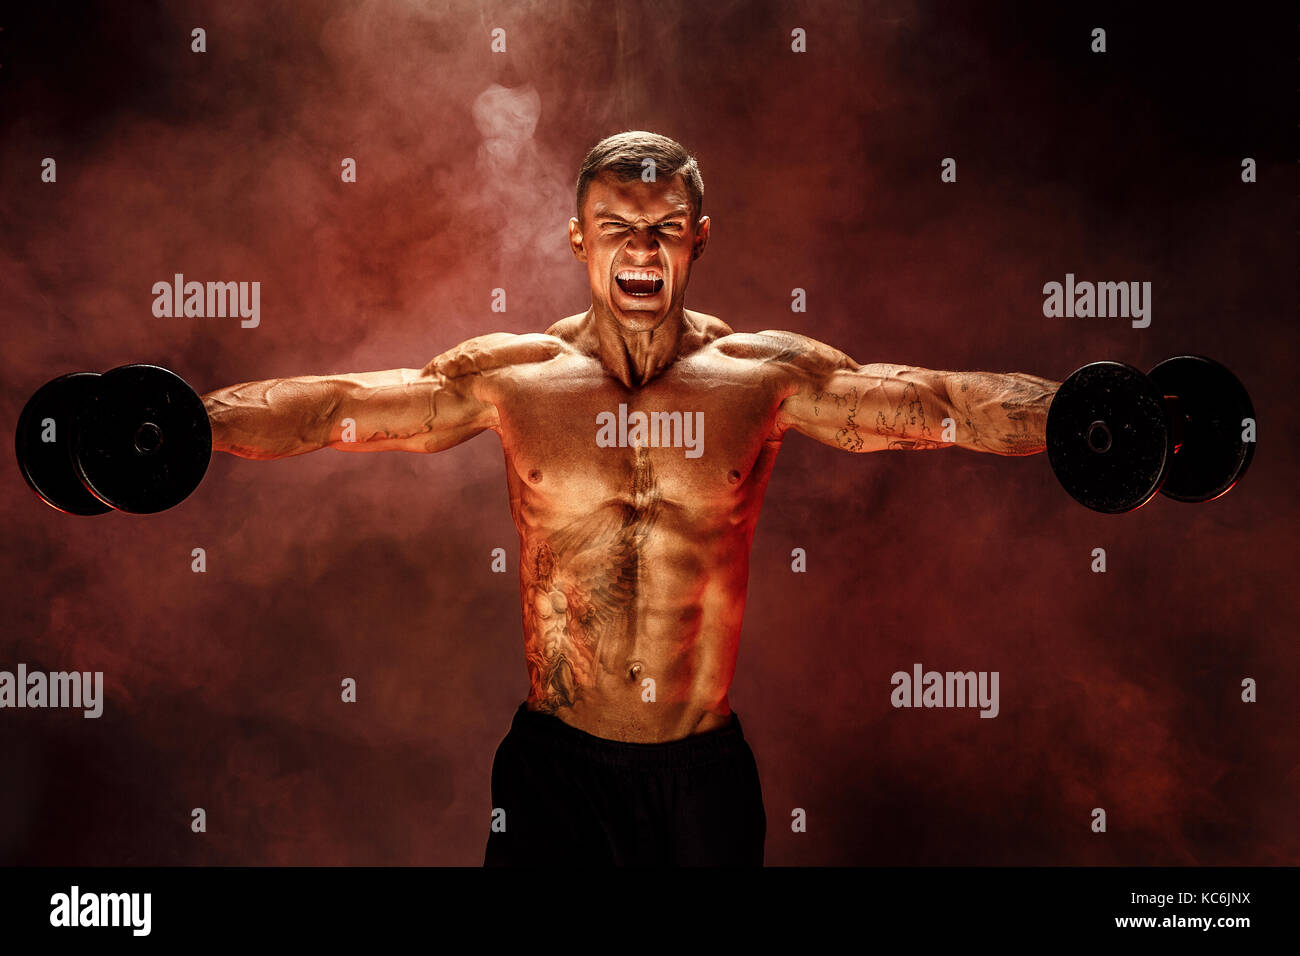 very brawny guy bodybuilder, execute exercise with dumbbells, on deltoid muscle shoulder Stock Photo